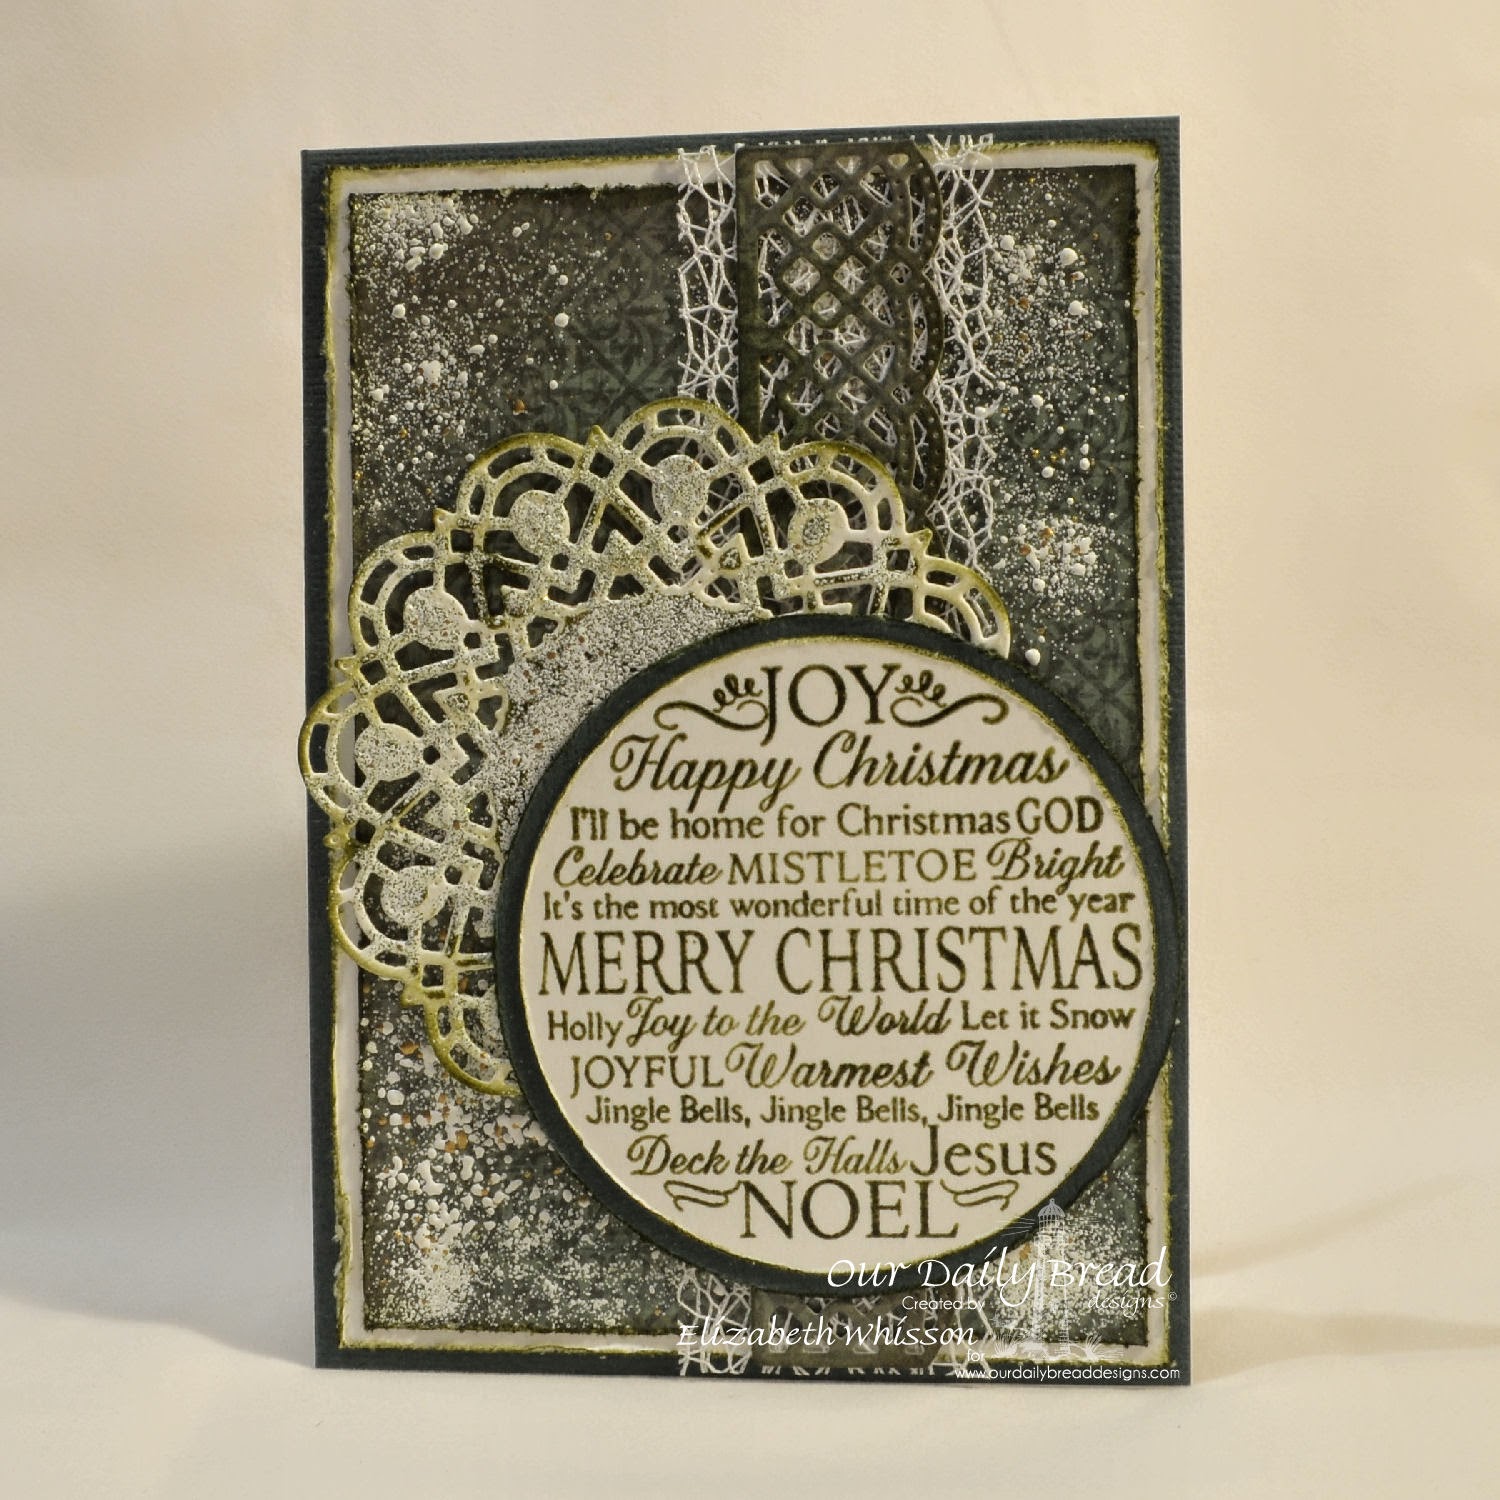 Our Daily Bread Designs, Noel Ornament, Doily Dies, Matting Circles Dies, Circle Ornament Dies, Beautiful Borders Dies, ODBD Christmas Paper Collection 2013, Designed by Elizabeth Whisson